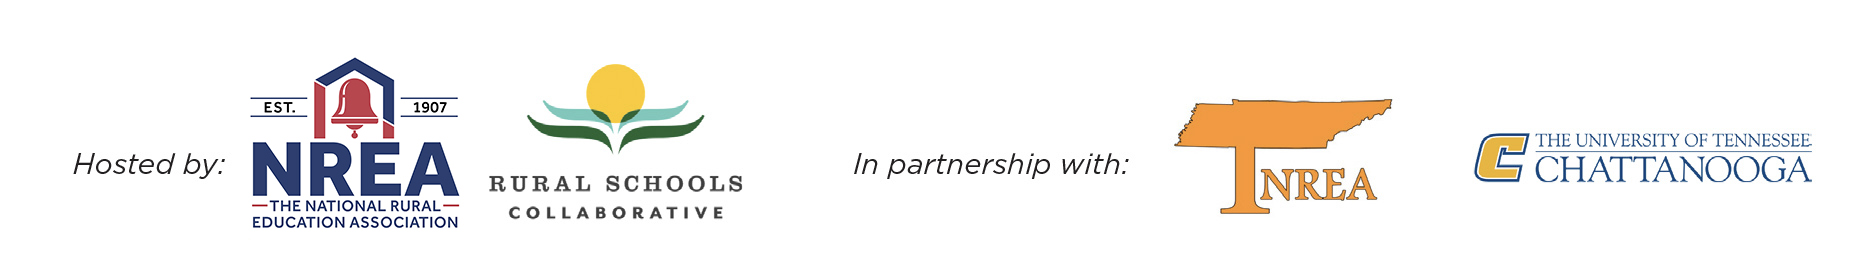 Partner logos, hosted by NREA, in partnership with Rural Schools Collaborative